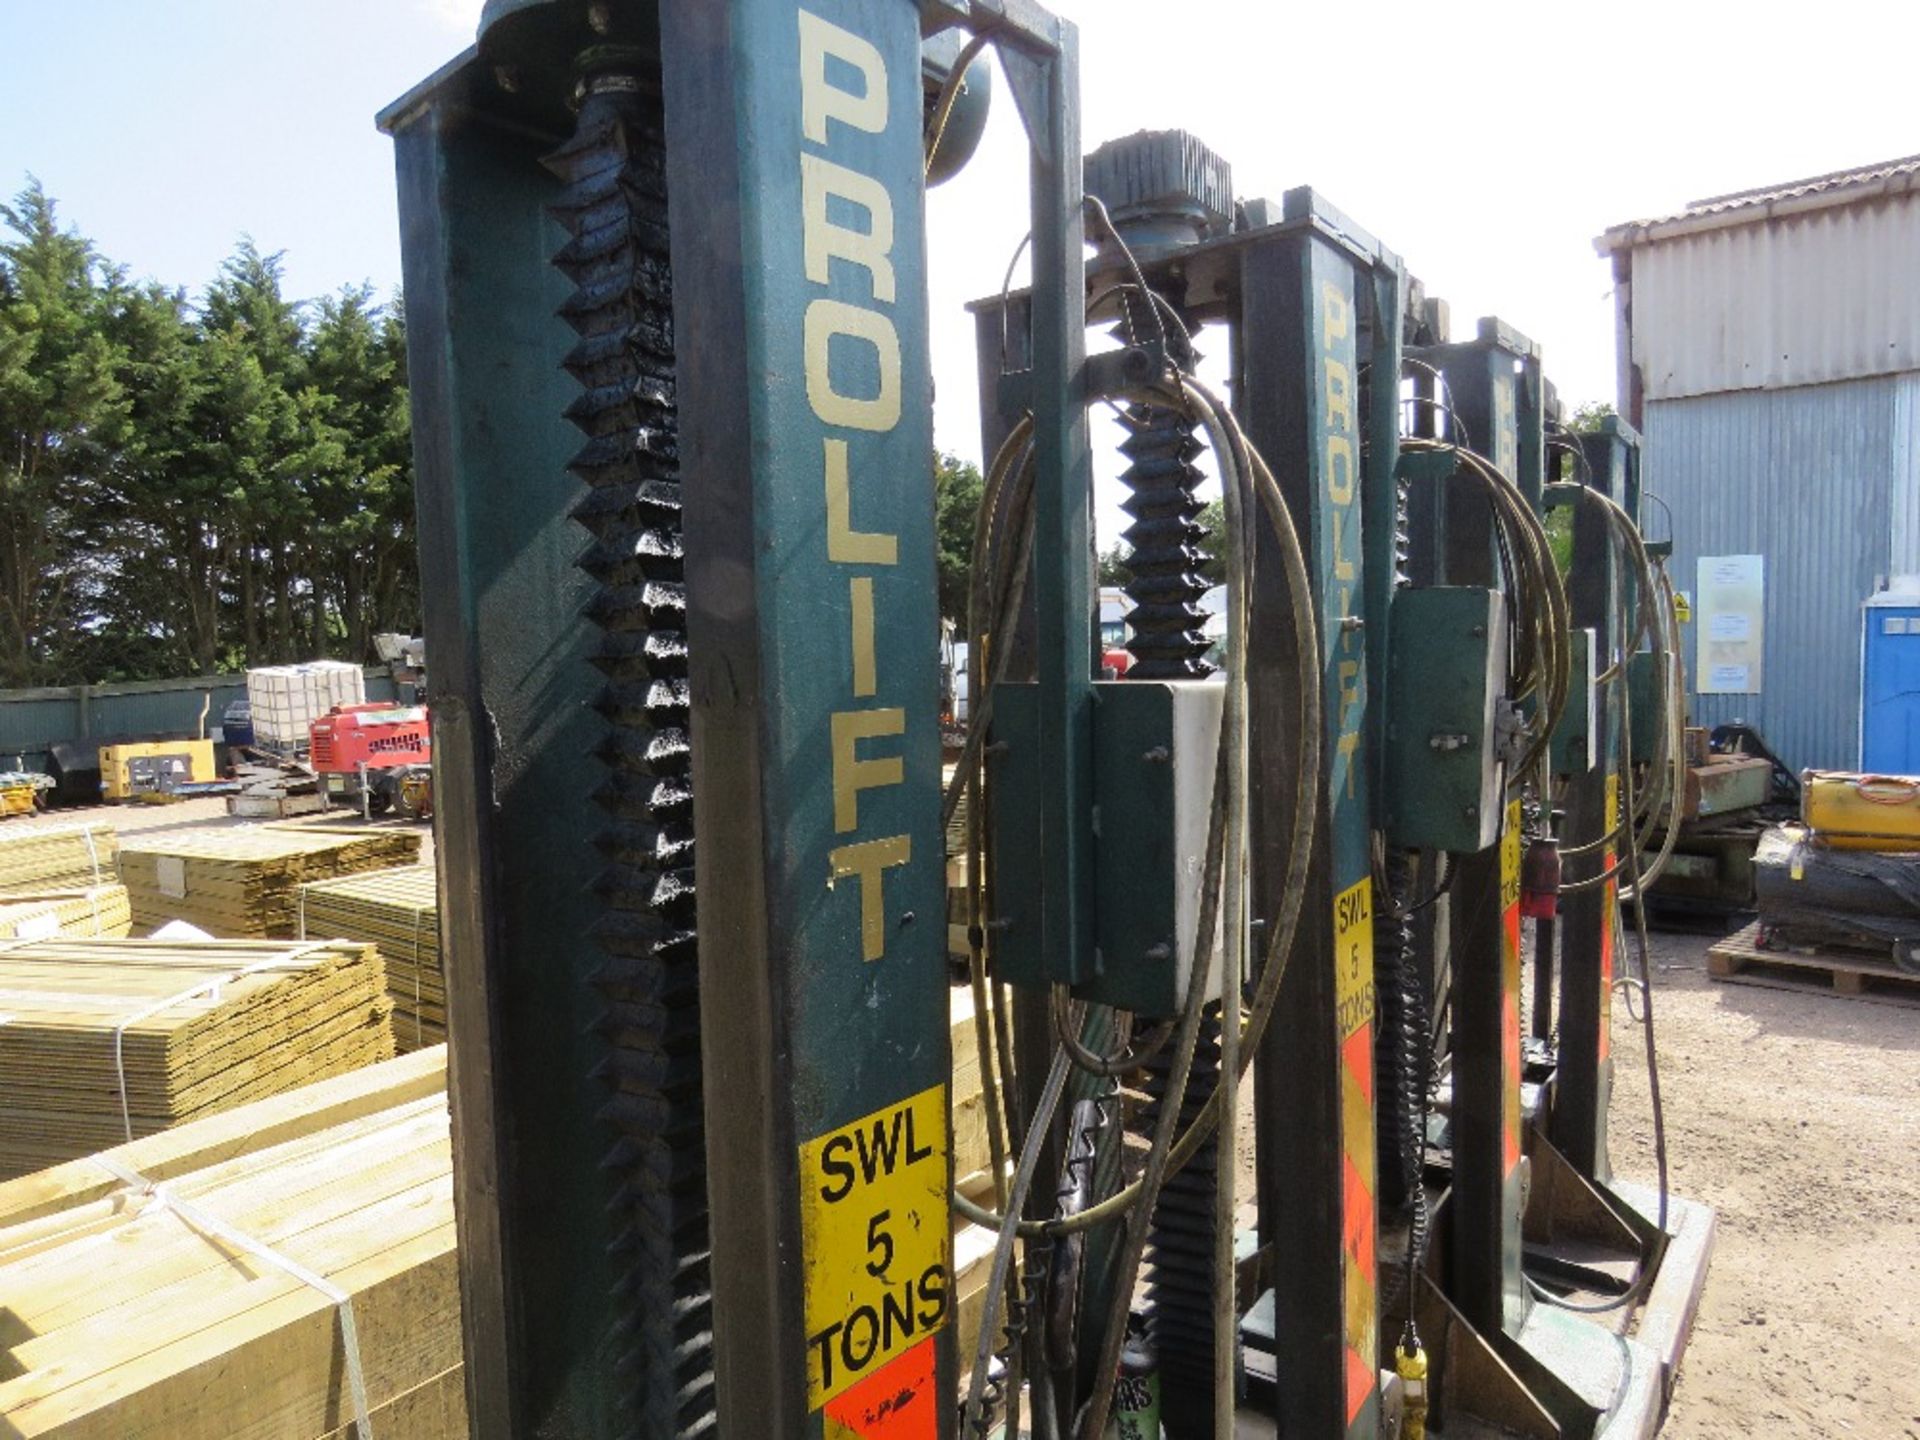 SET OF 4 X PROLIFT PL20 PORTABLE COLUMN LIFT UNITS FOR COMMERCIAL VEHICLES, 5 TONNE RATED CAPACITY, - Image 5 of 5